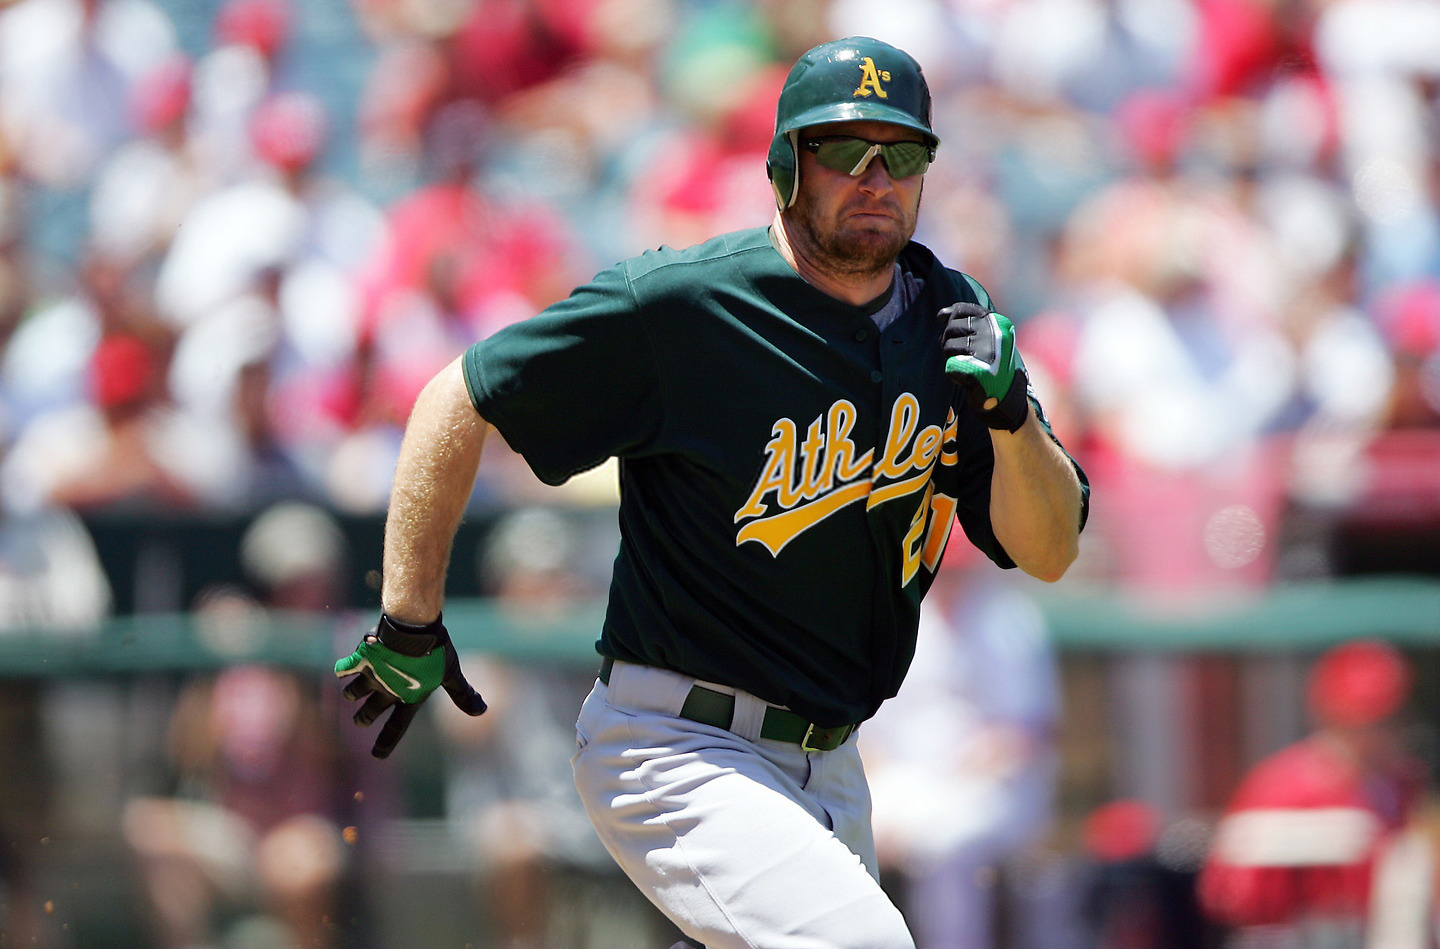 Kotsay hired by A’s to replace Melvin as manager